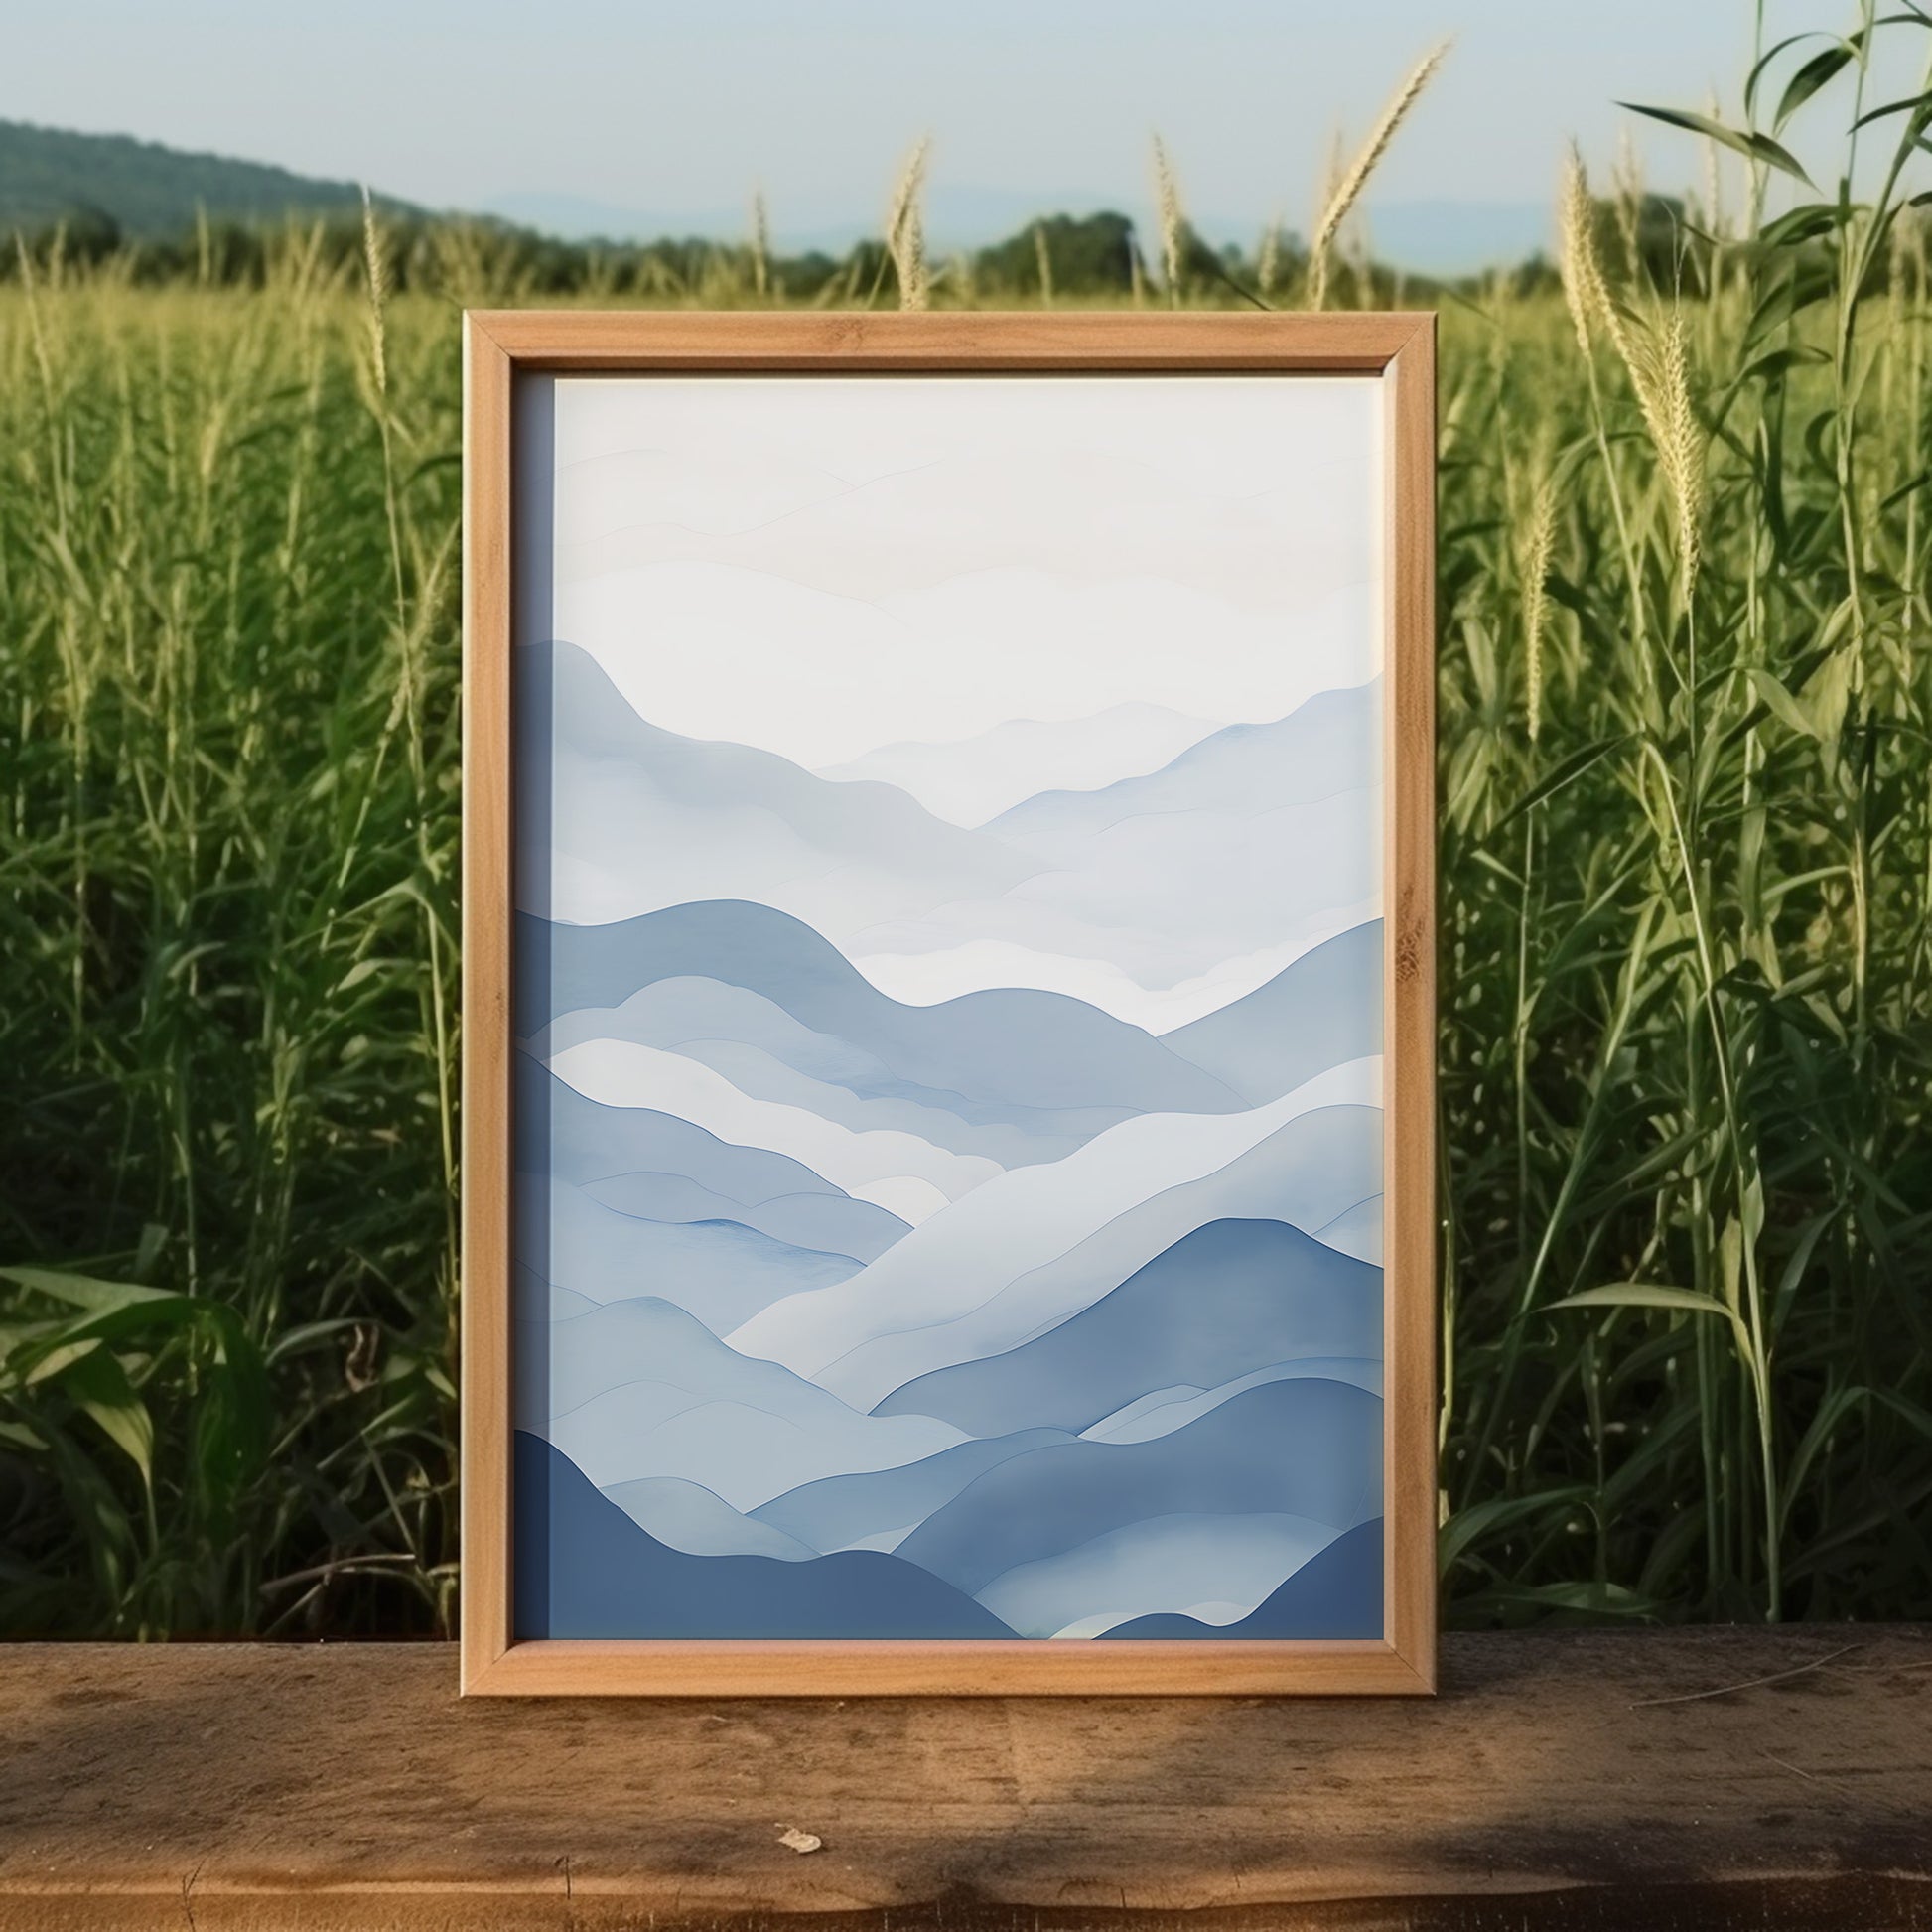 A framed picture of blue mountain ranges displayed outdoors with greenery in the background.